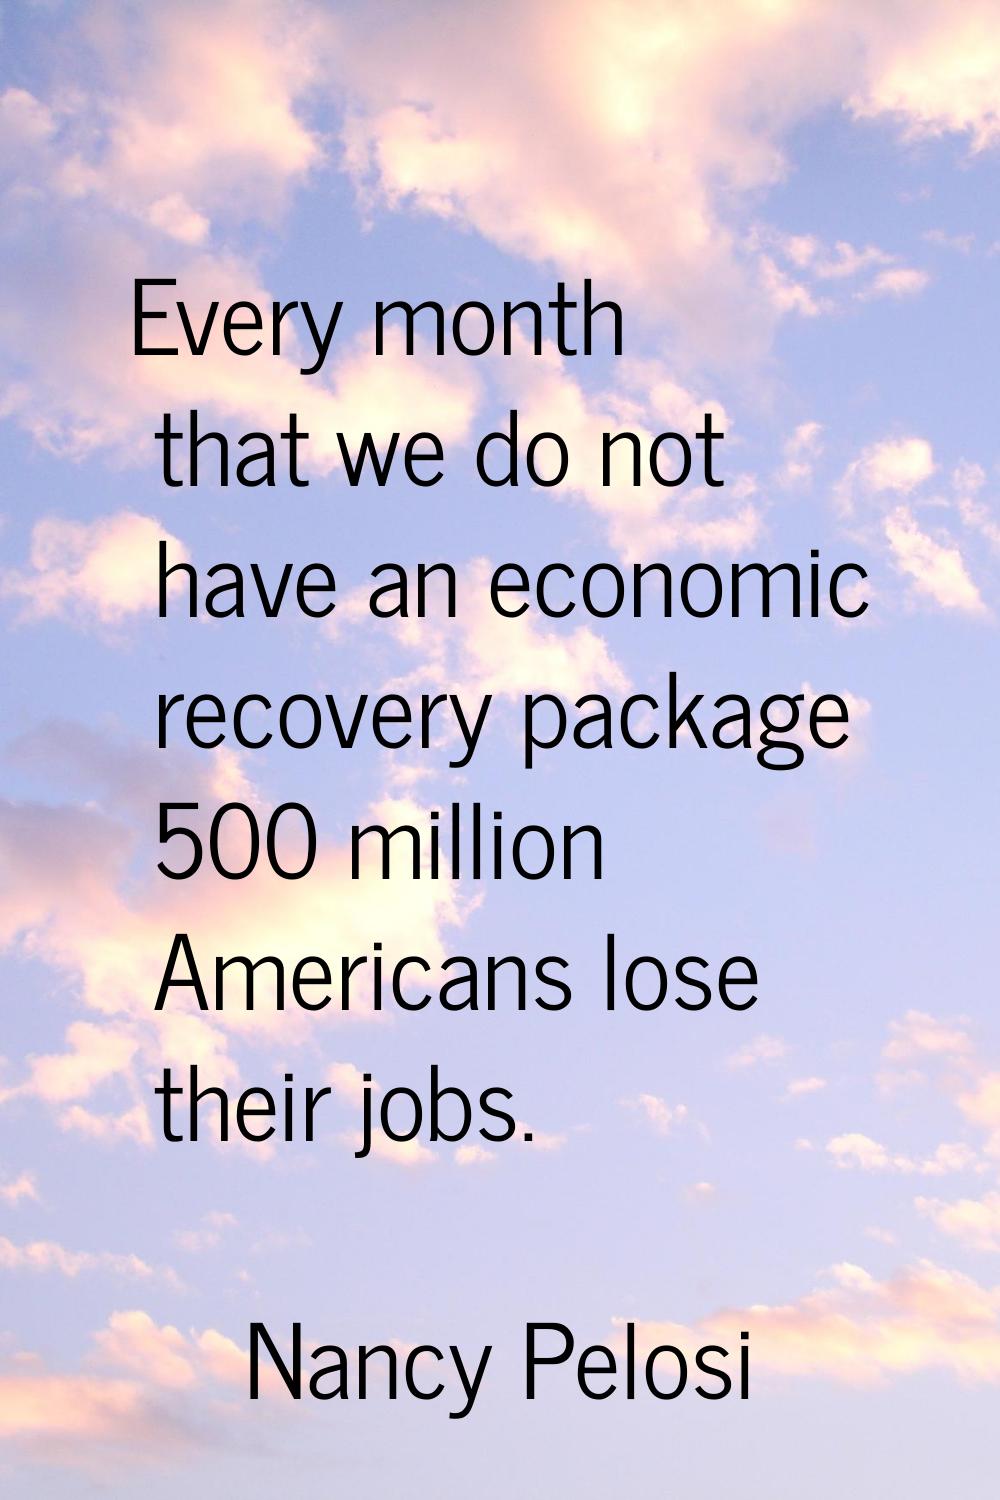 Every month that we do not have an economic recovery package 500 million Americans lose their jobs.